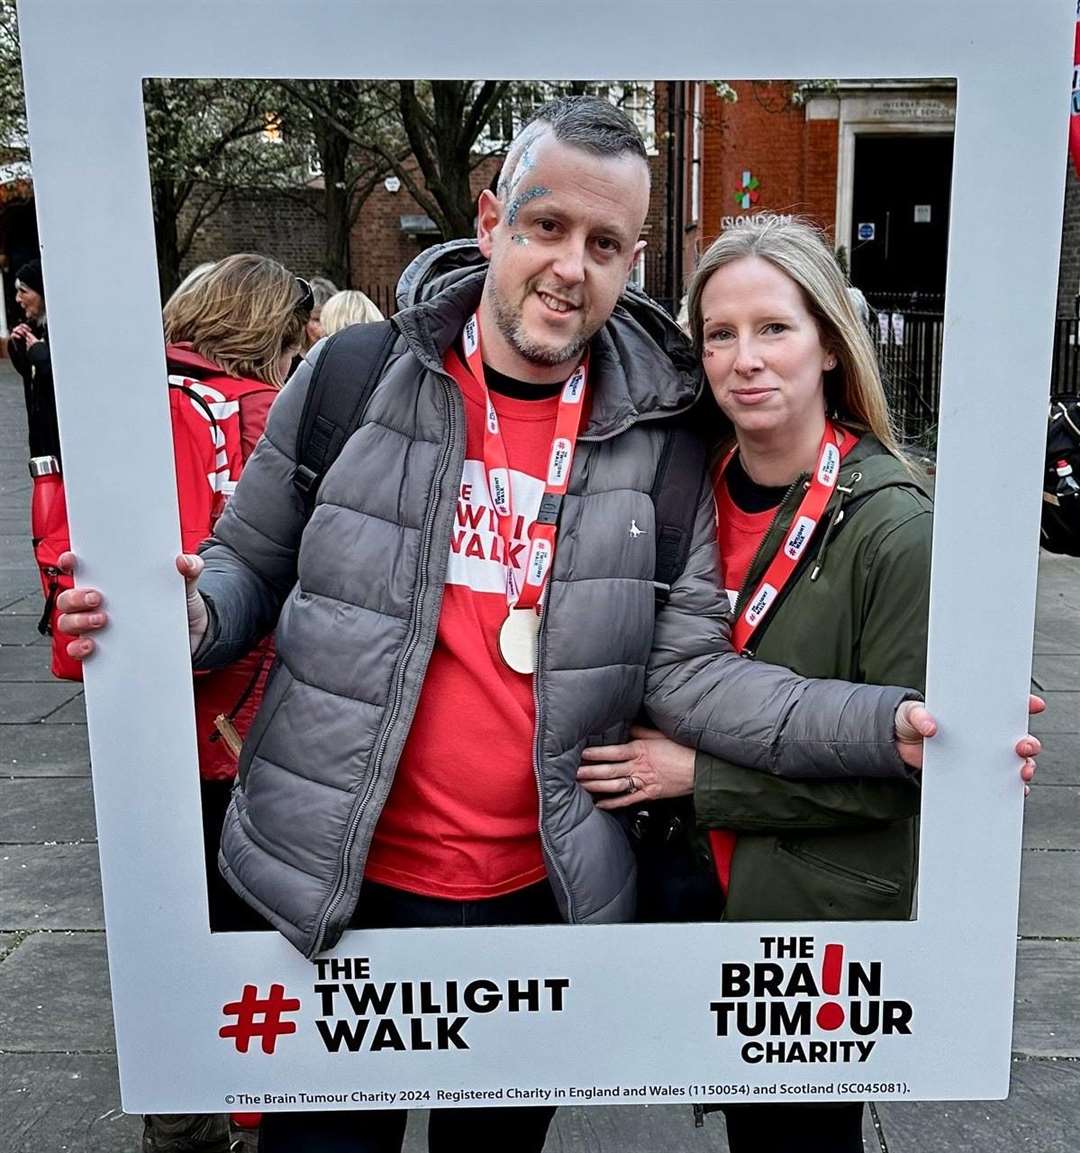 John raised funds for the Brain Tumour Charity by completing a twilight walk. Photo credit: John Rendle